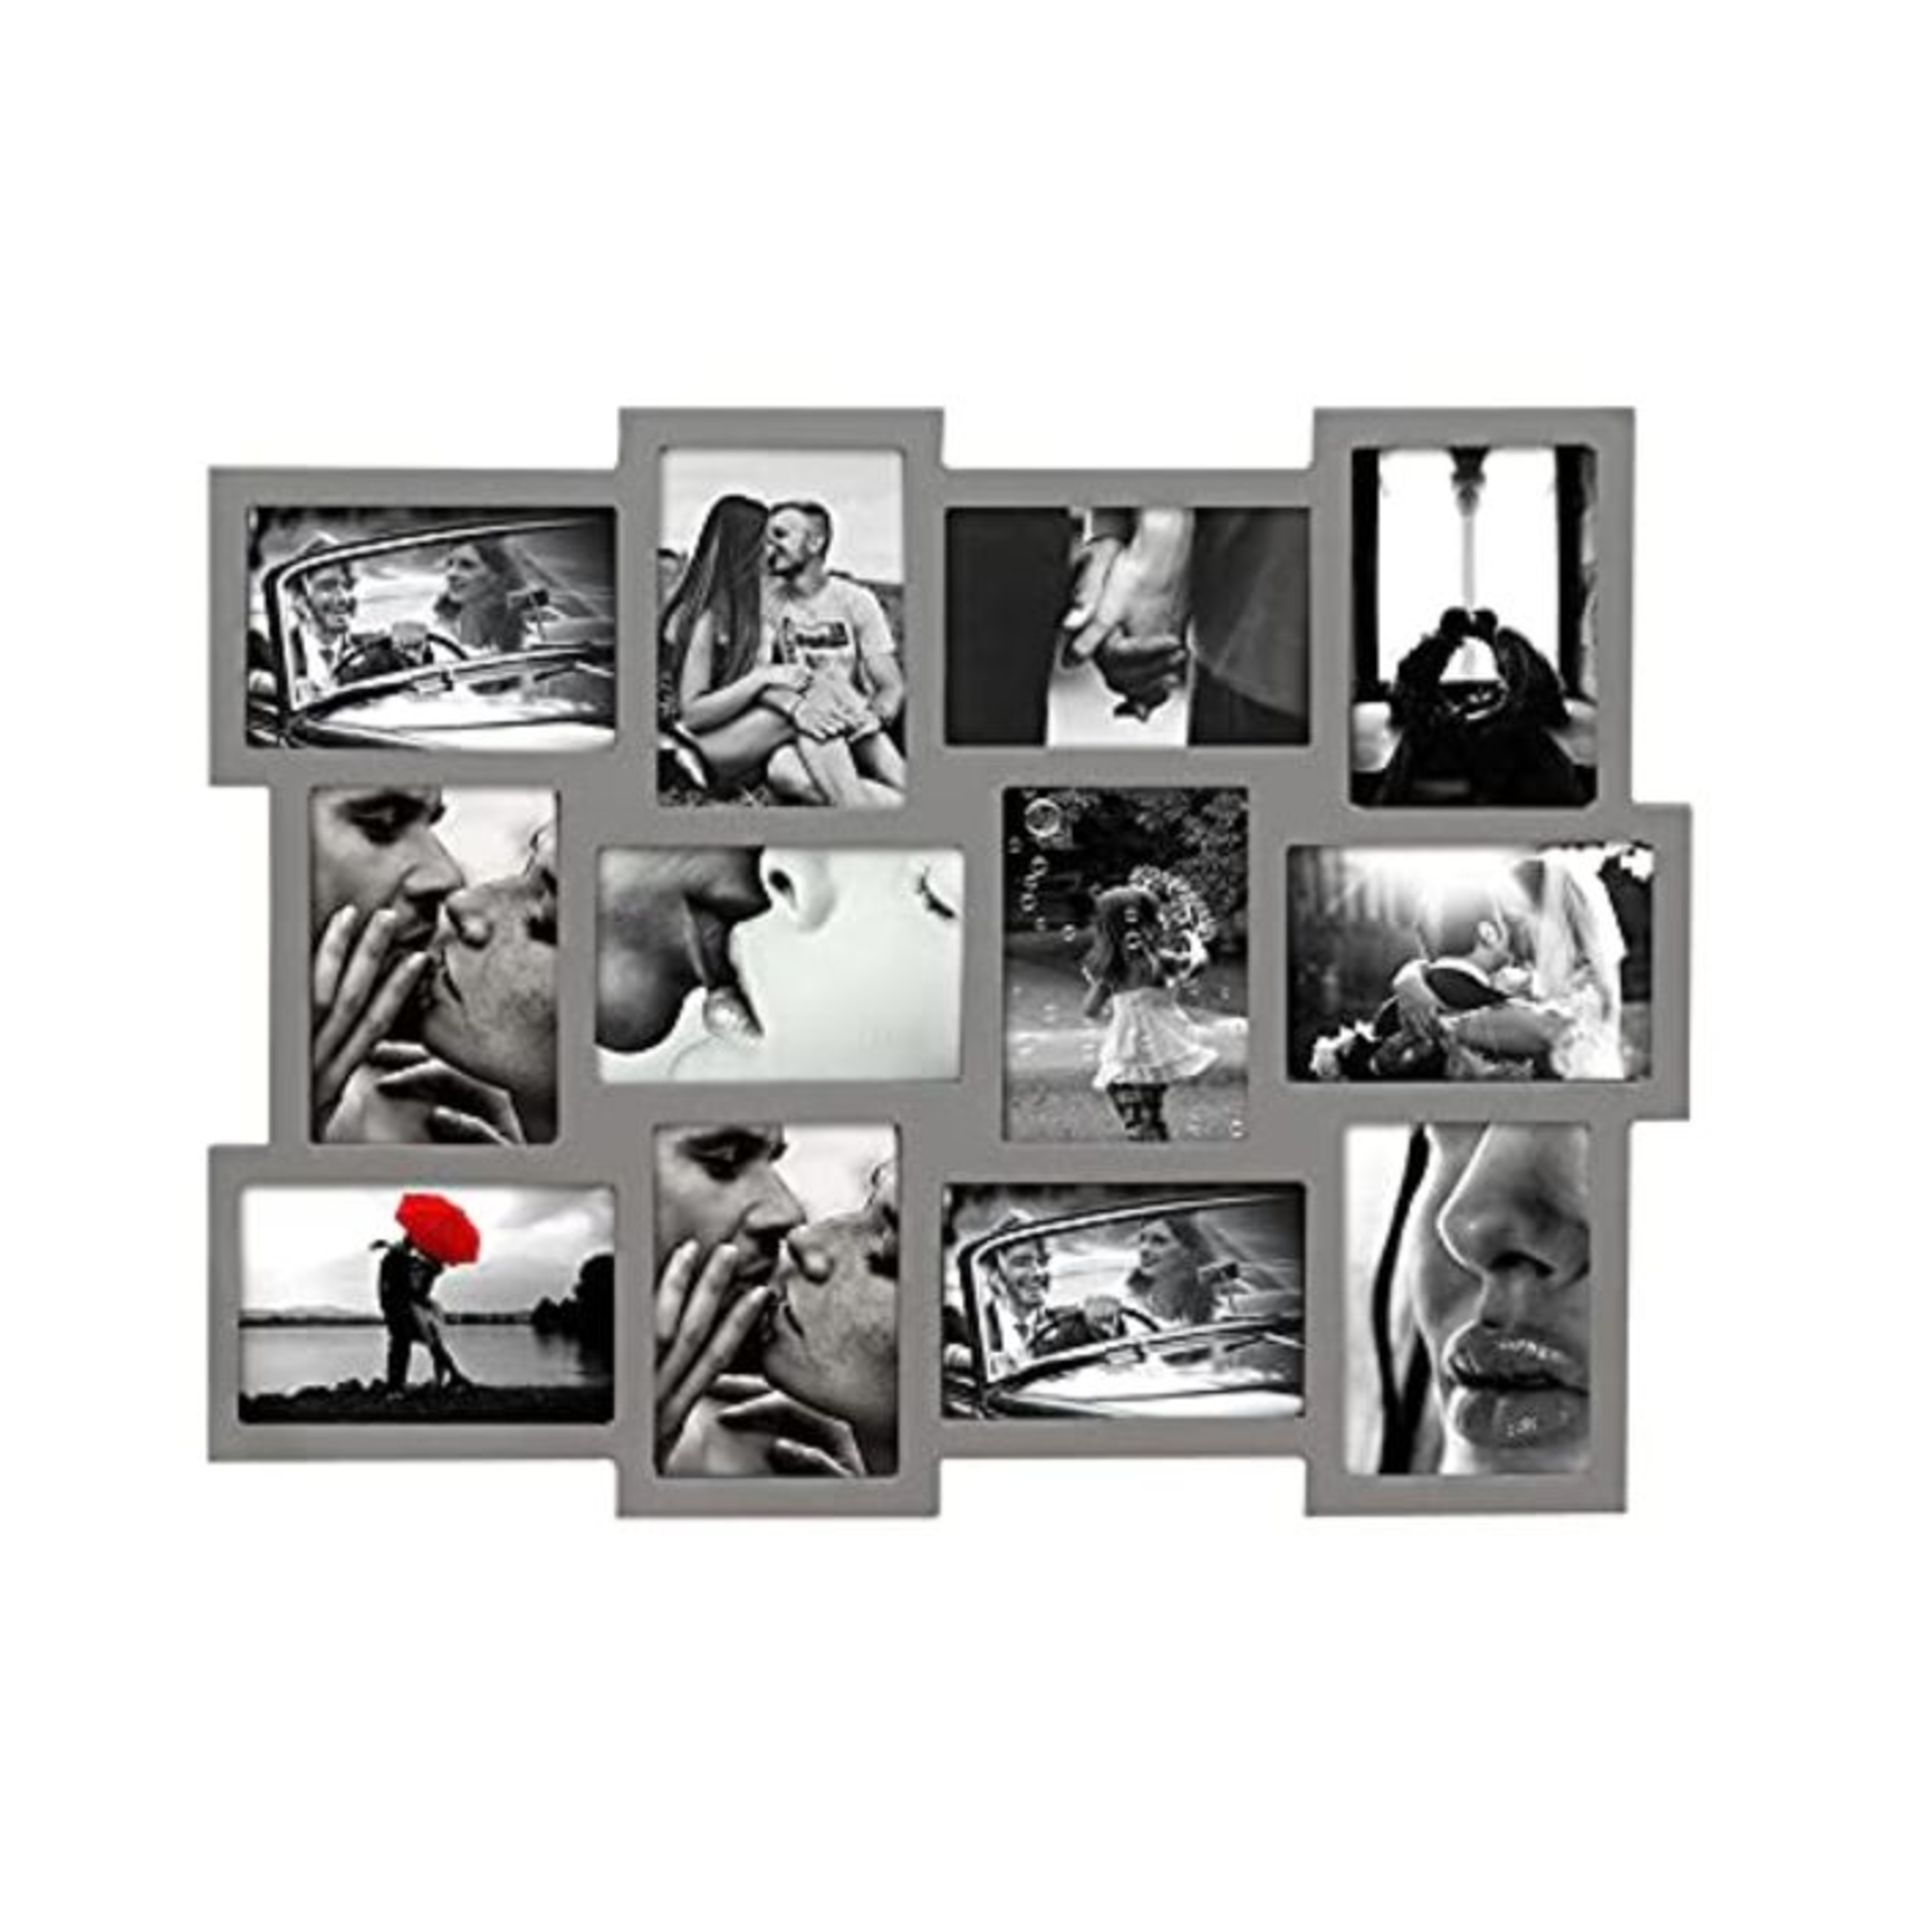 Rebecca Mobili Multiple Picture Frame Wall Hanging Photo Holder 12 Photo 10 x 15 cm Md